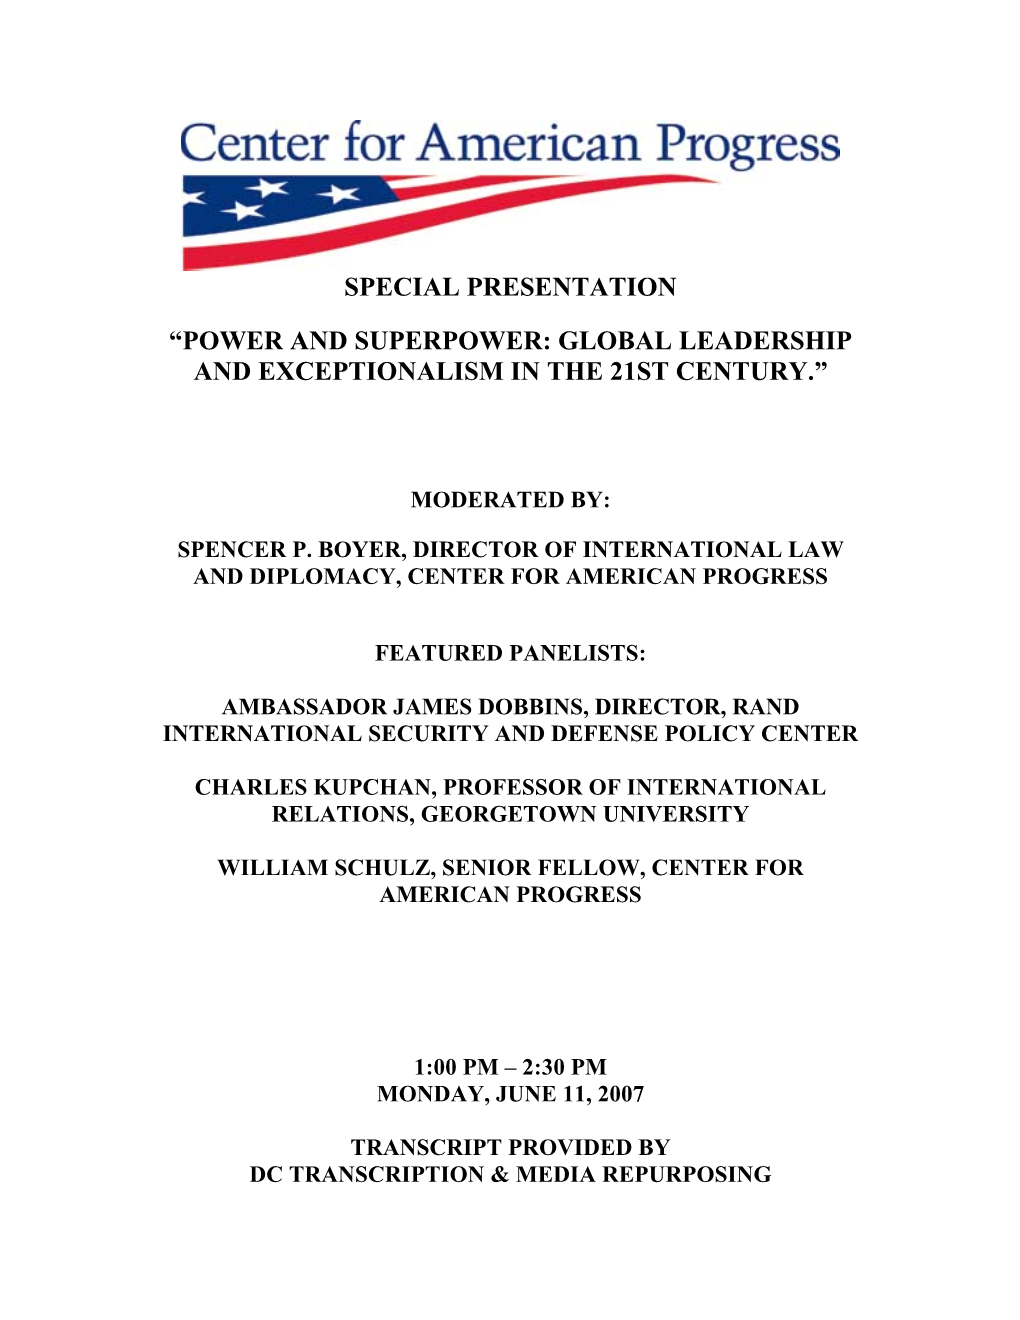 Power and Superpower: Global Leadership and Exceptionalism in the 21St Century.”